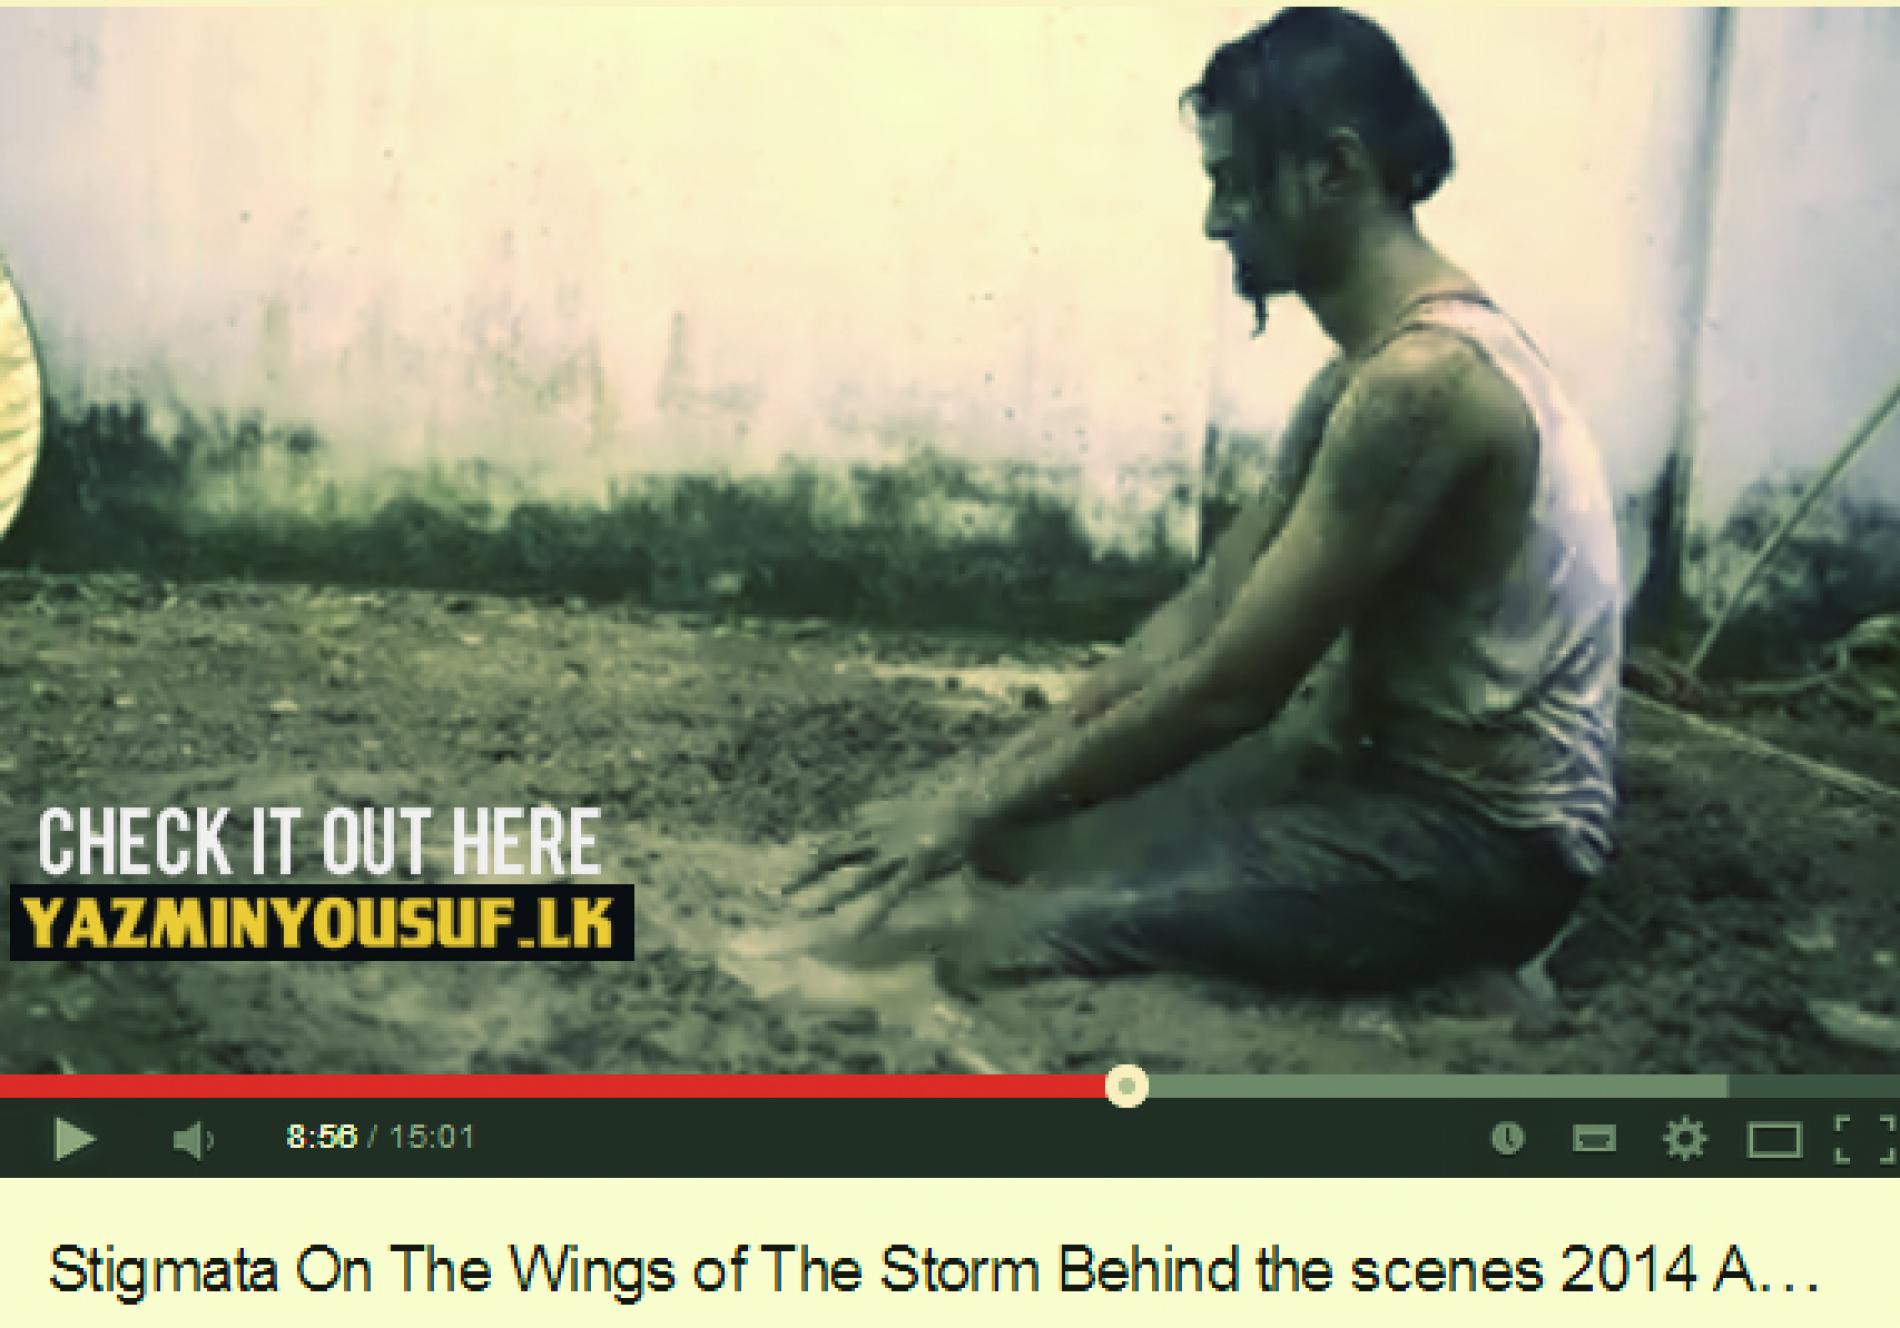 Stigmata On The Wings of The Storm: Behind the scenes